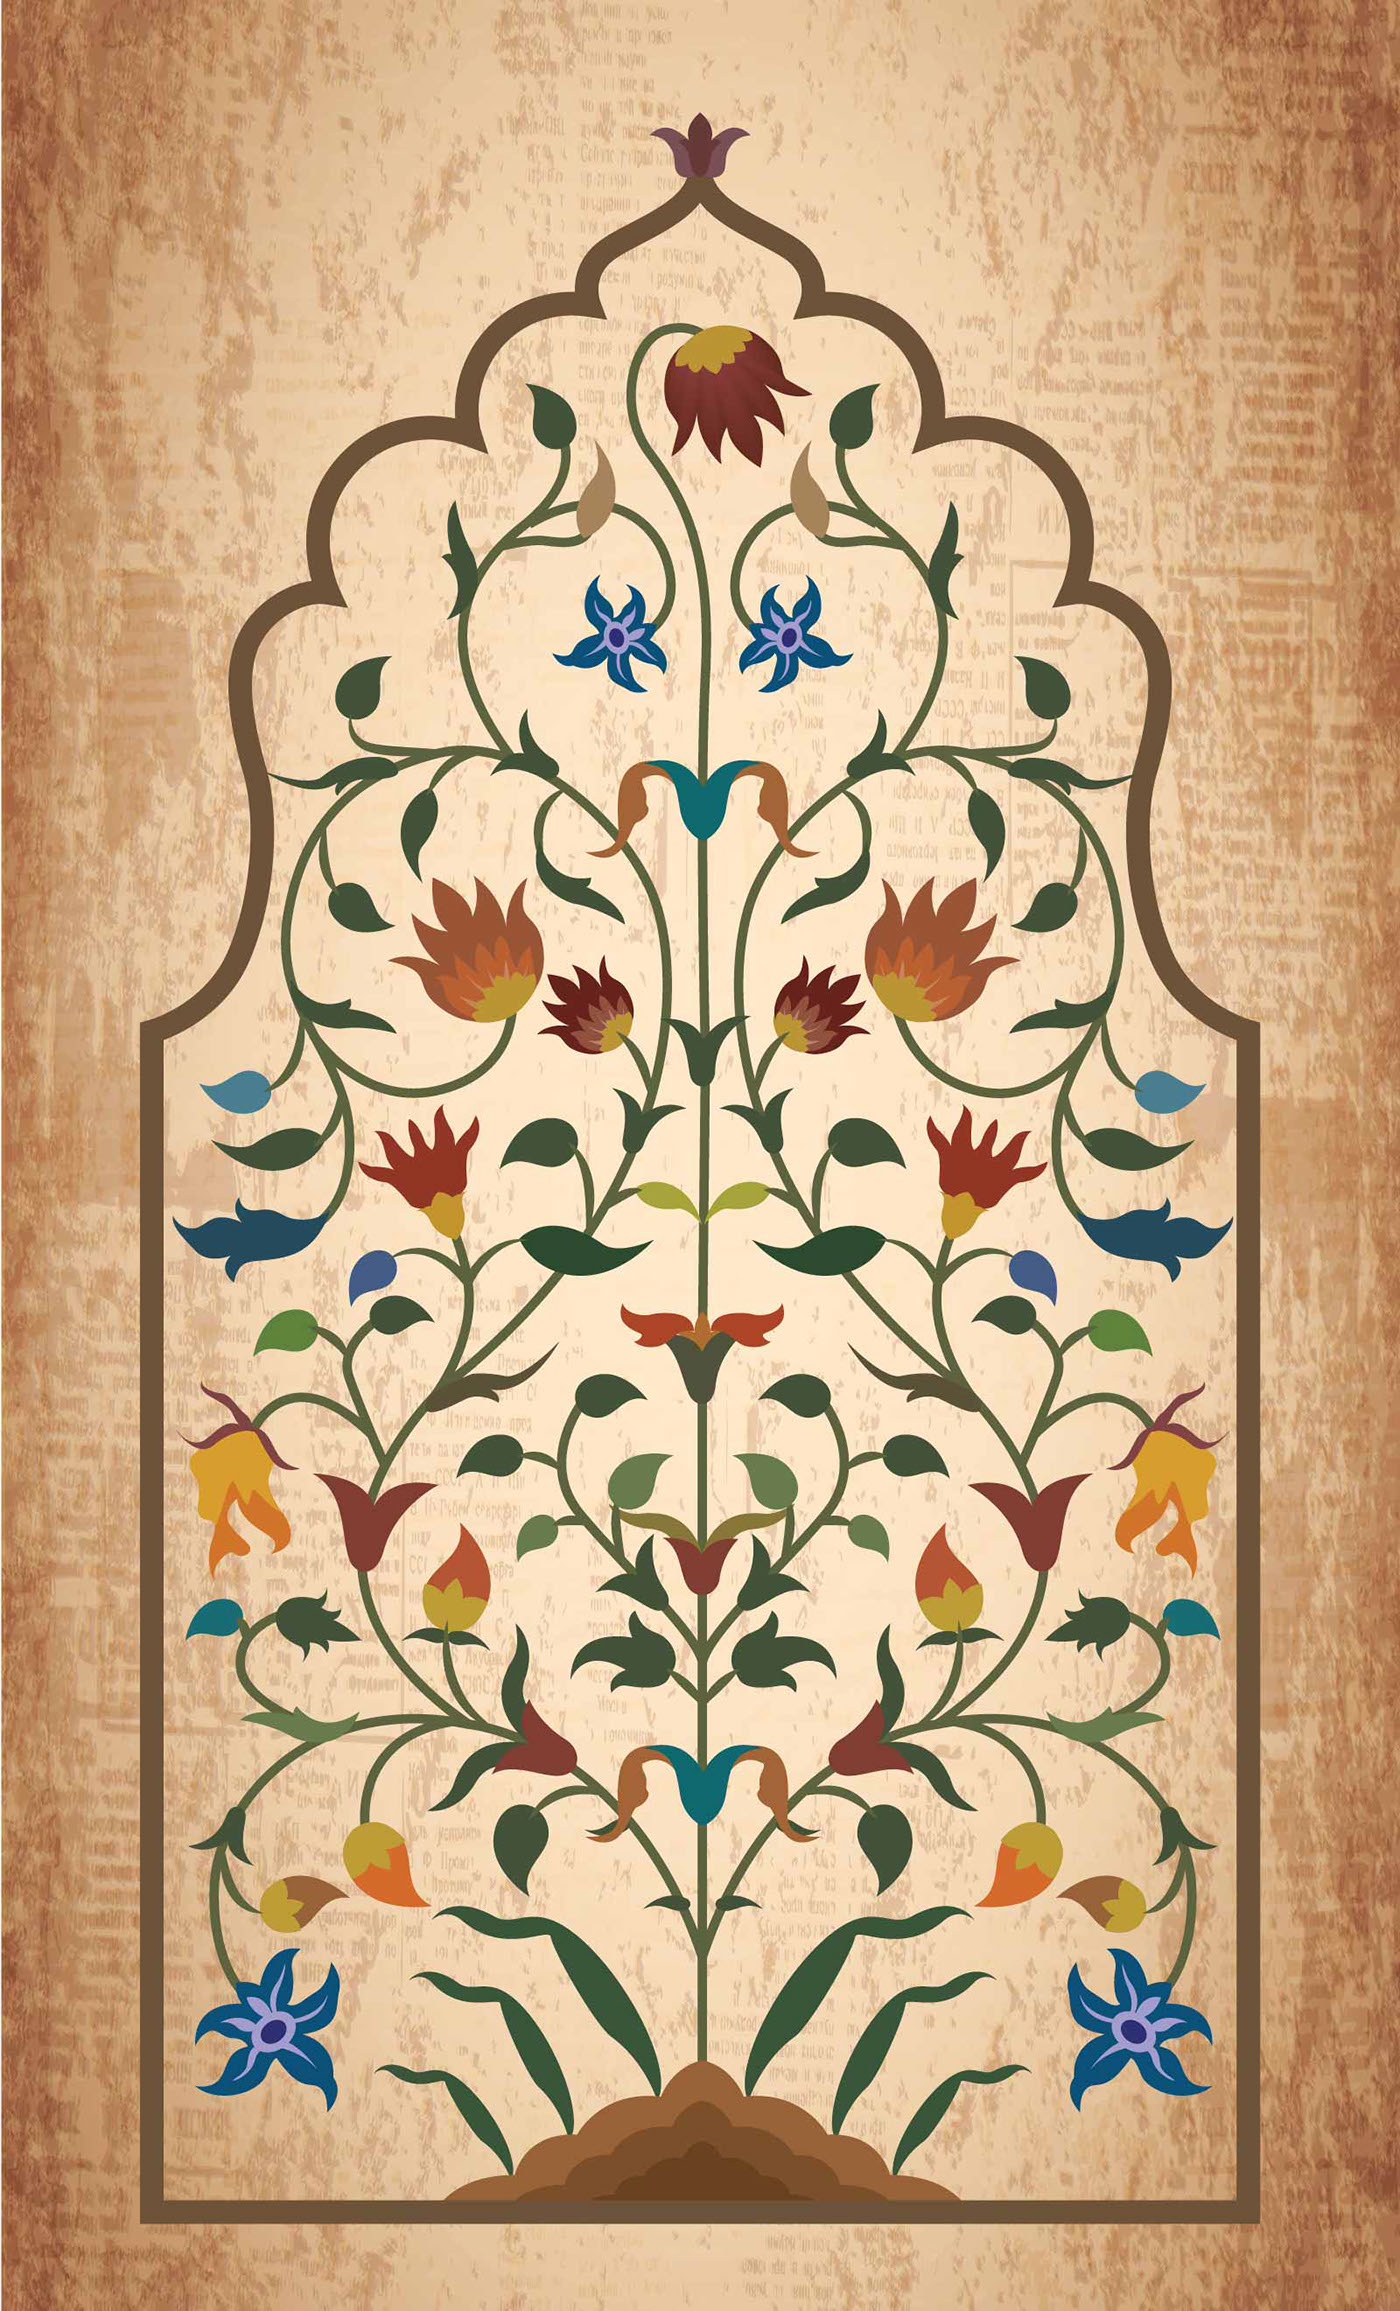 mughal persian architecture palace floral pattern Delhi Agra islamic Indian art